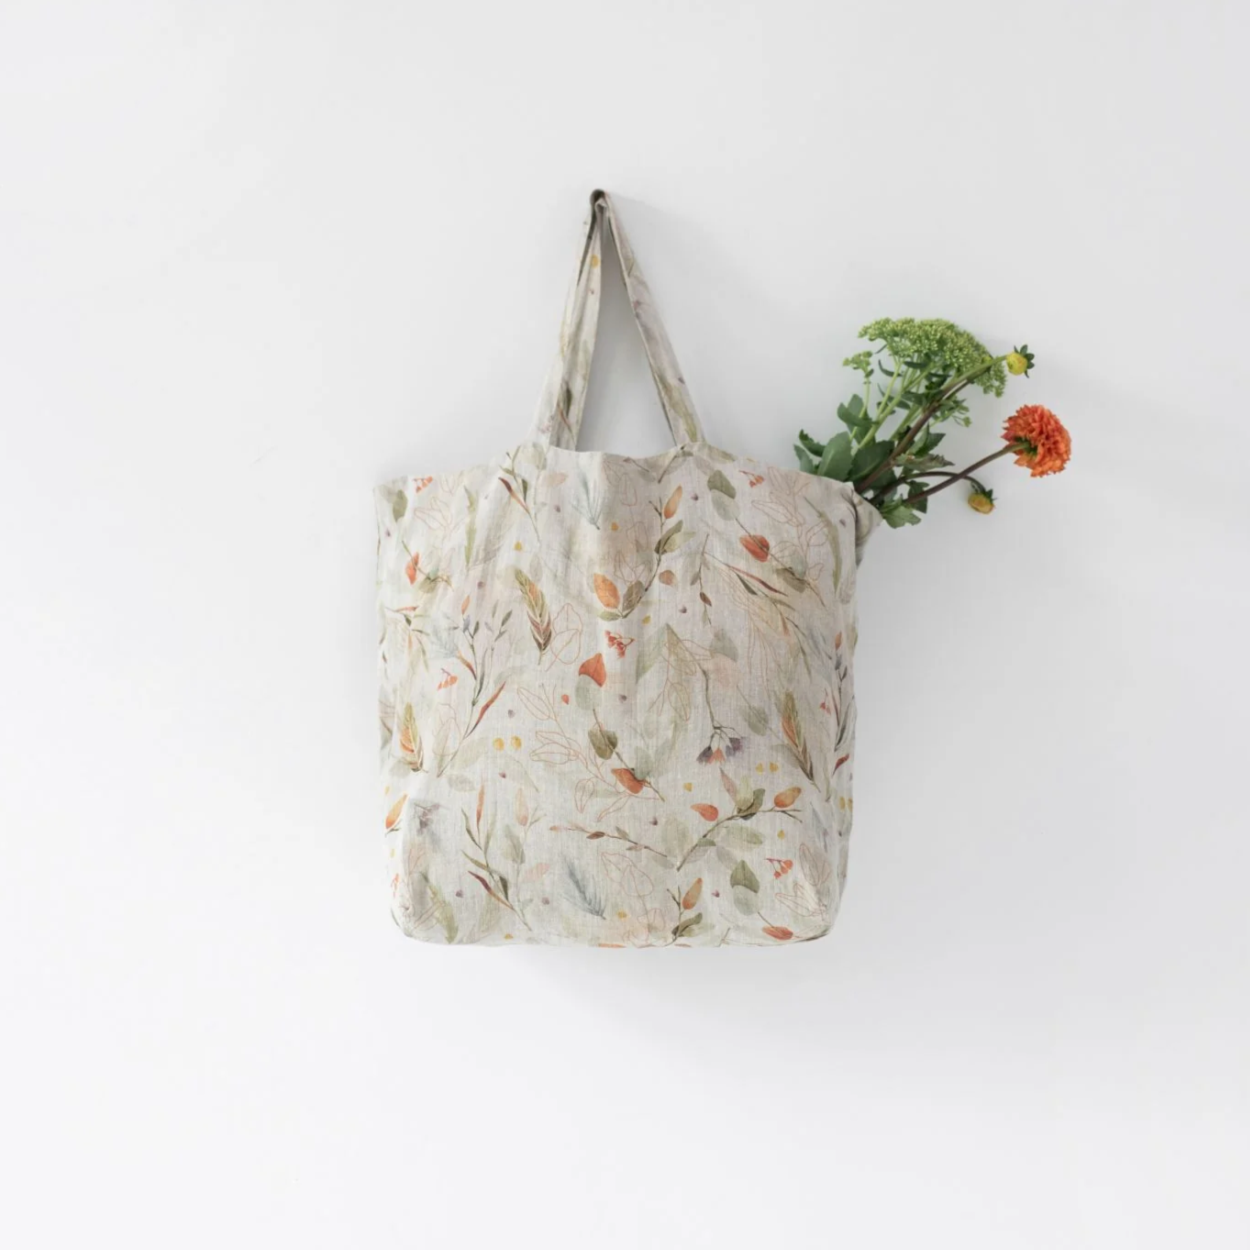 A Linen Tales Floral Linen Bag with earthy floral & leaf designs and a flower bouquet sticking out from the top.